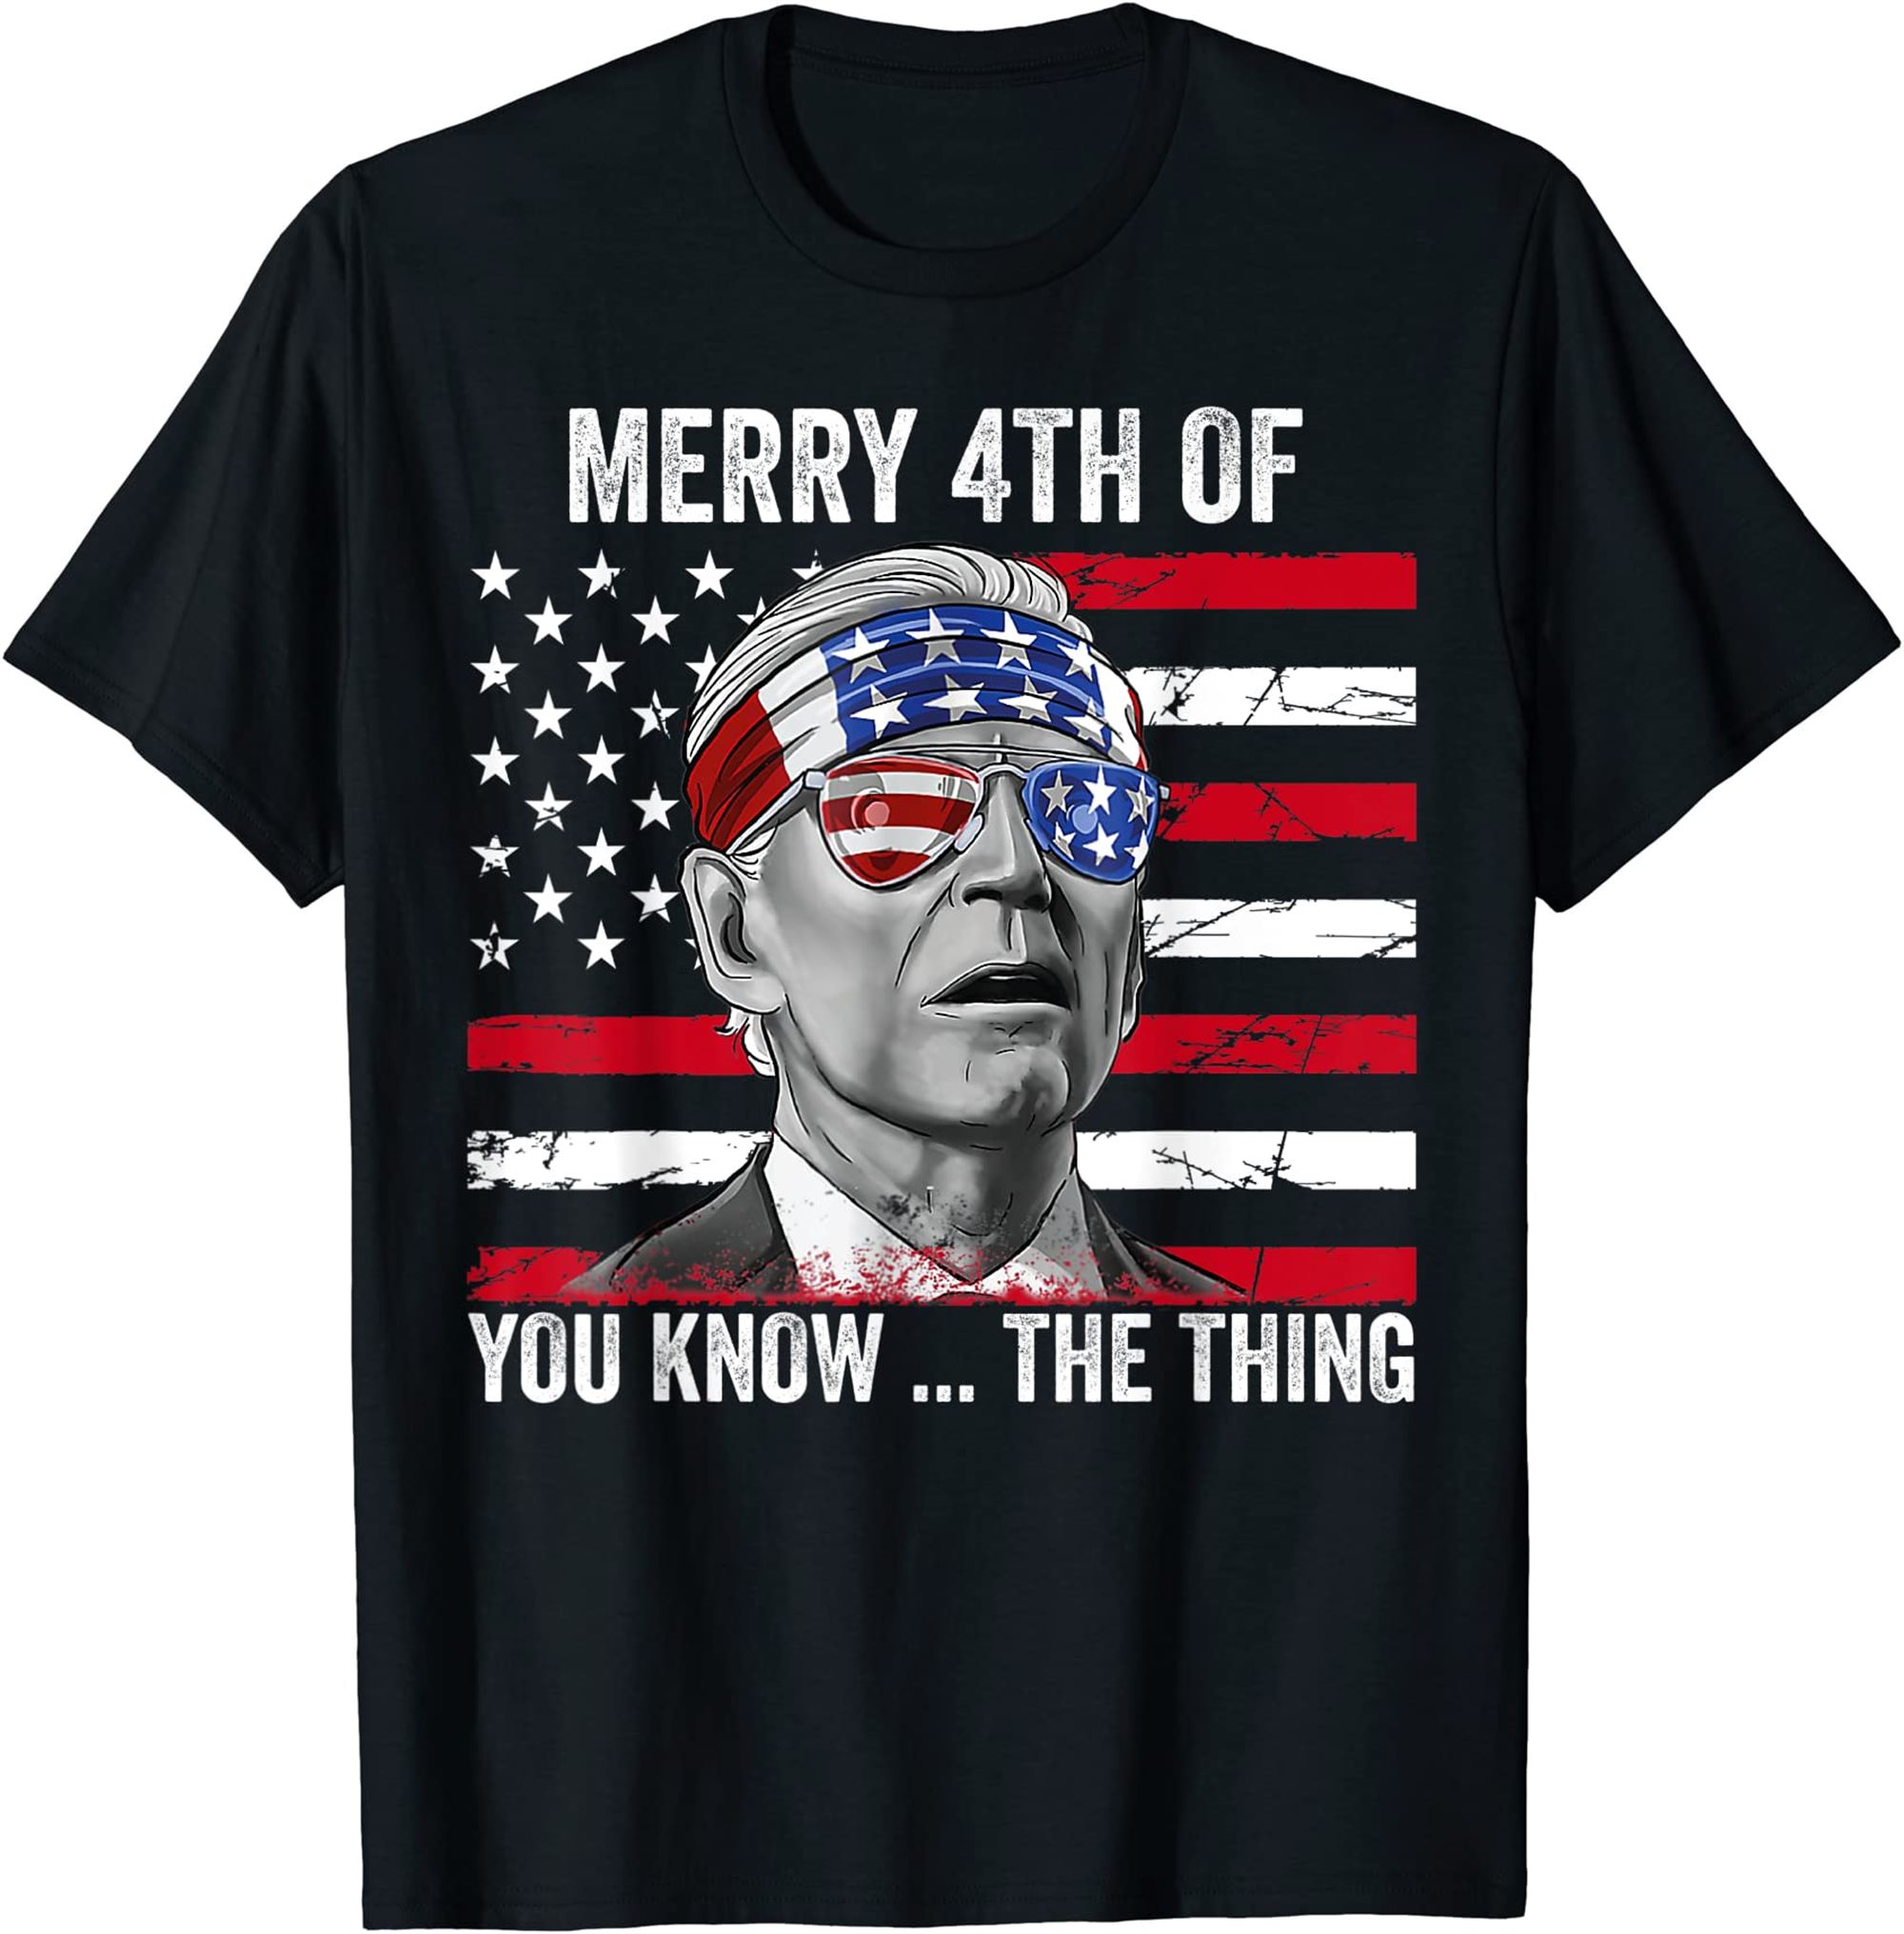 Merry 4th Of You Know The Thing Happy 4th Of July Memorial T-shirt Plus Size Up To 5xl